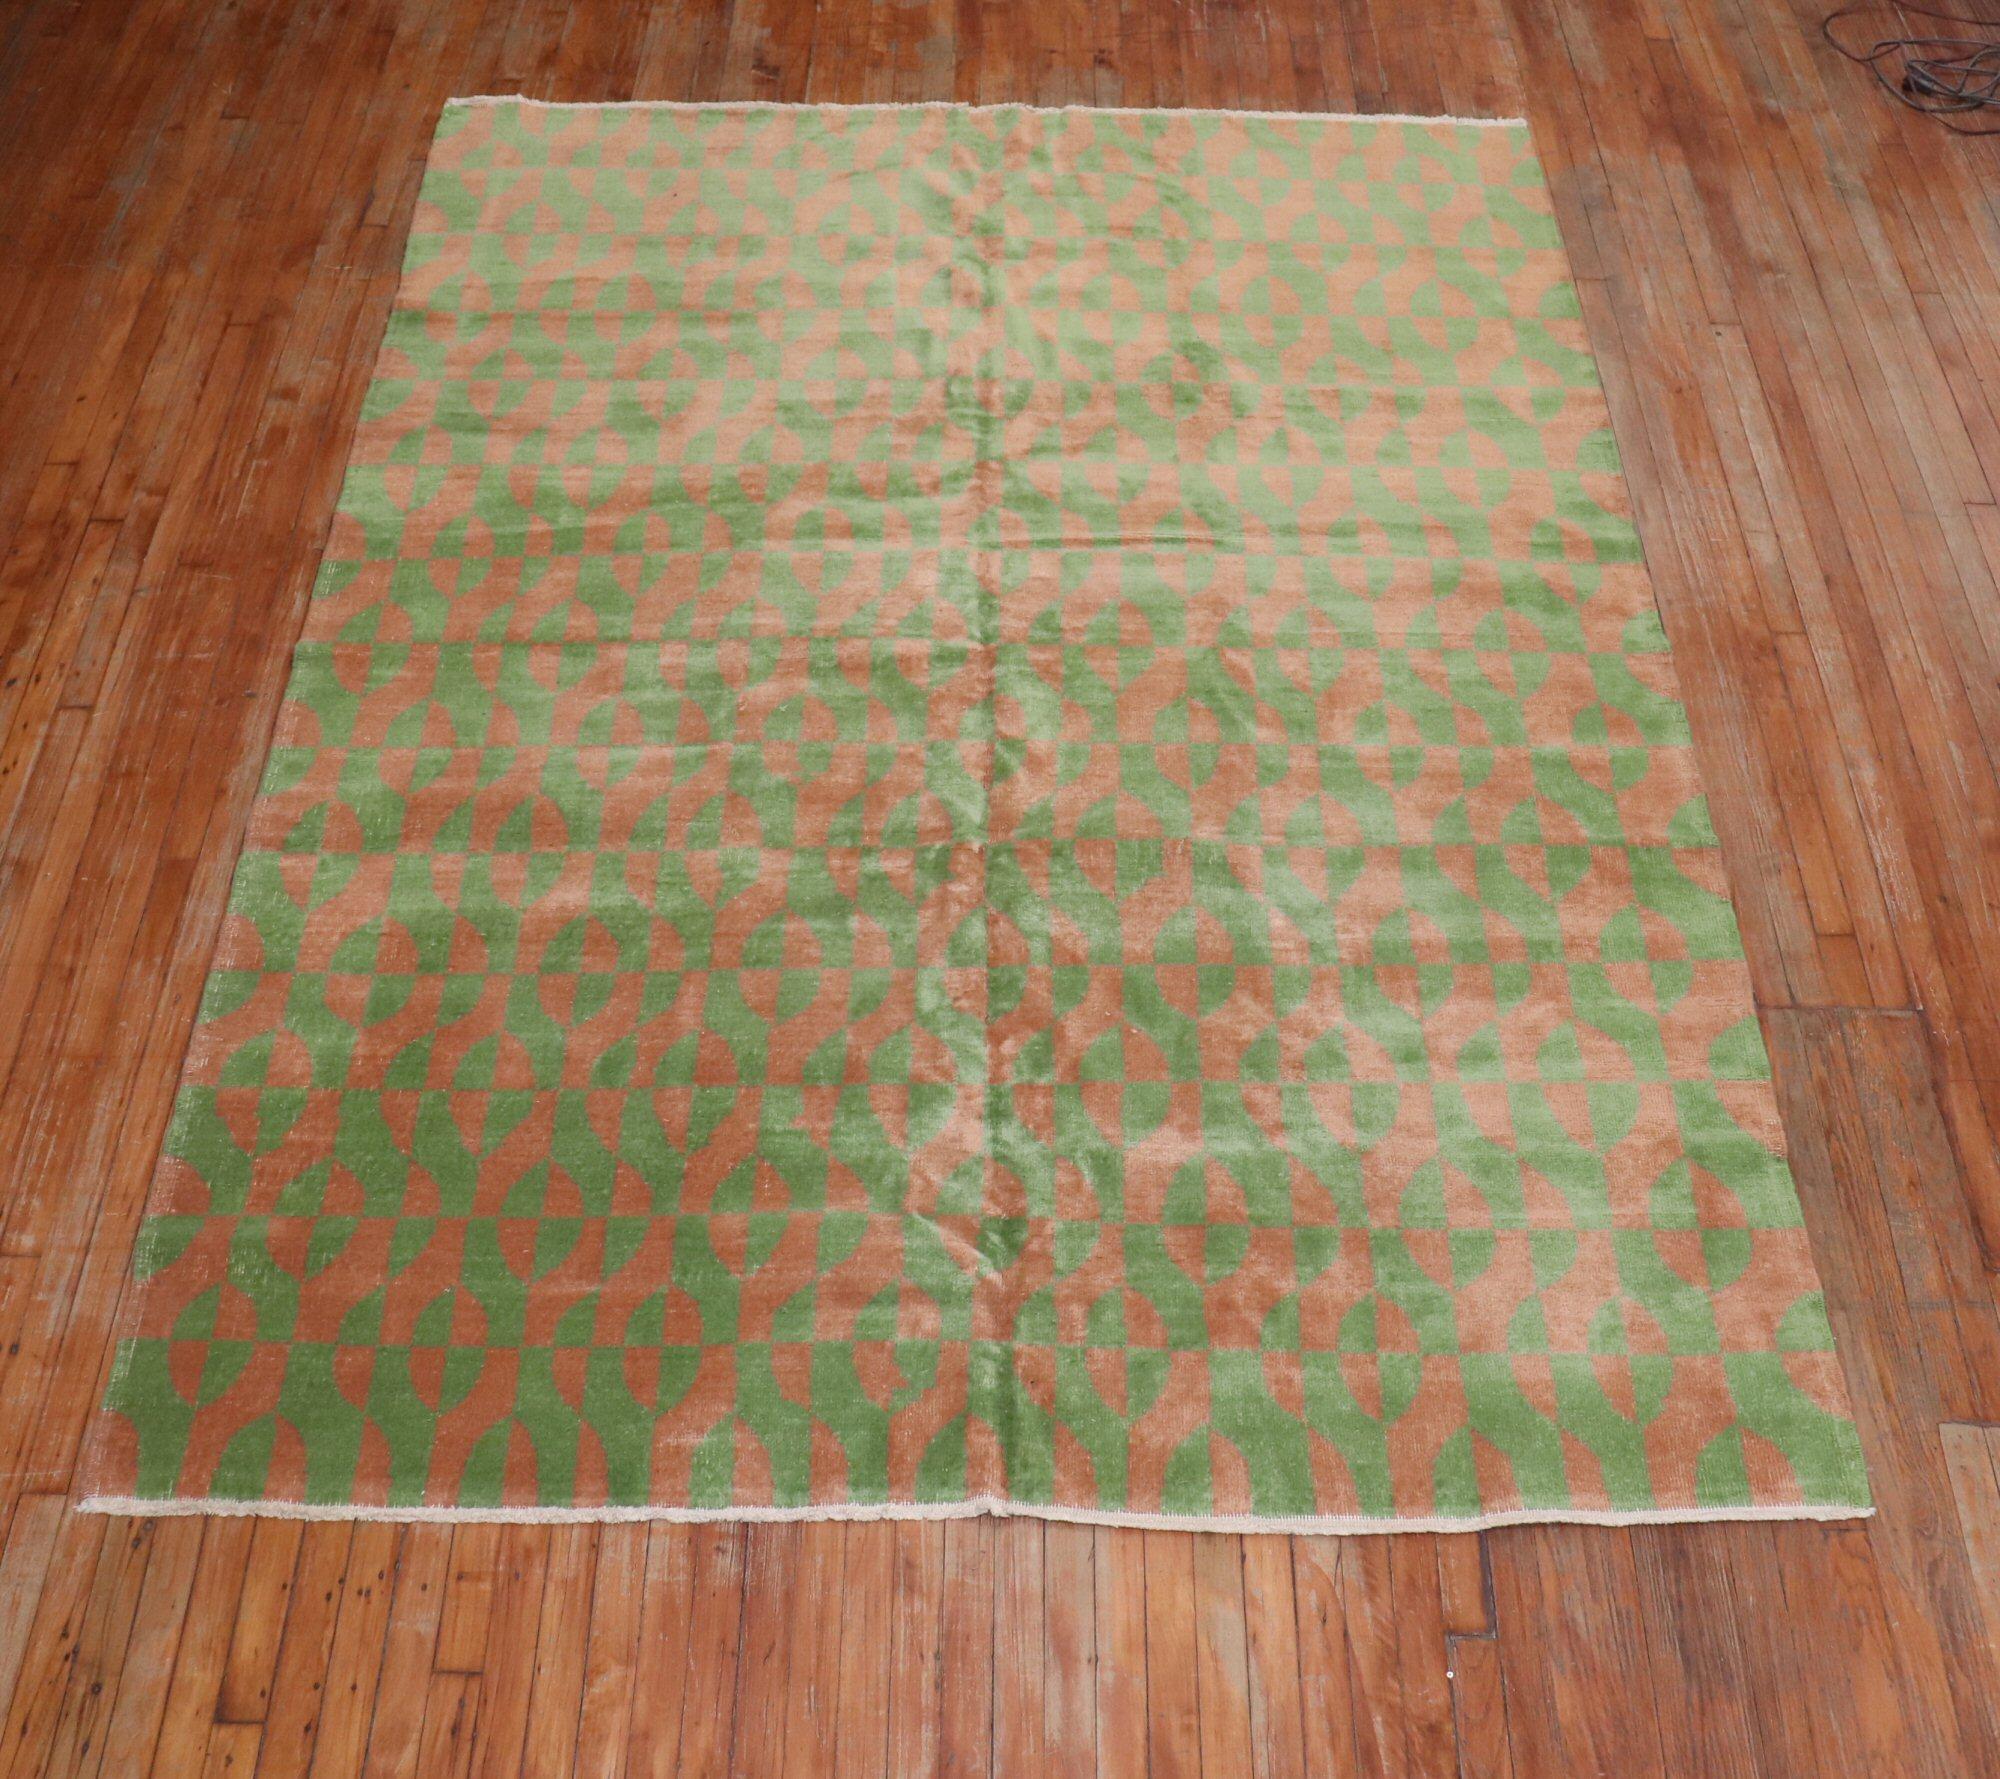 Midcentury Turkish deco rug in greens and cantaloupe. The rug was probably custom made in the middle of the 20th century inspired by the art deco movement.

Measures: 7' x 9'10